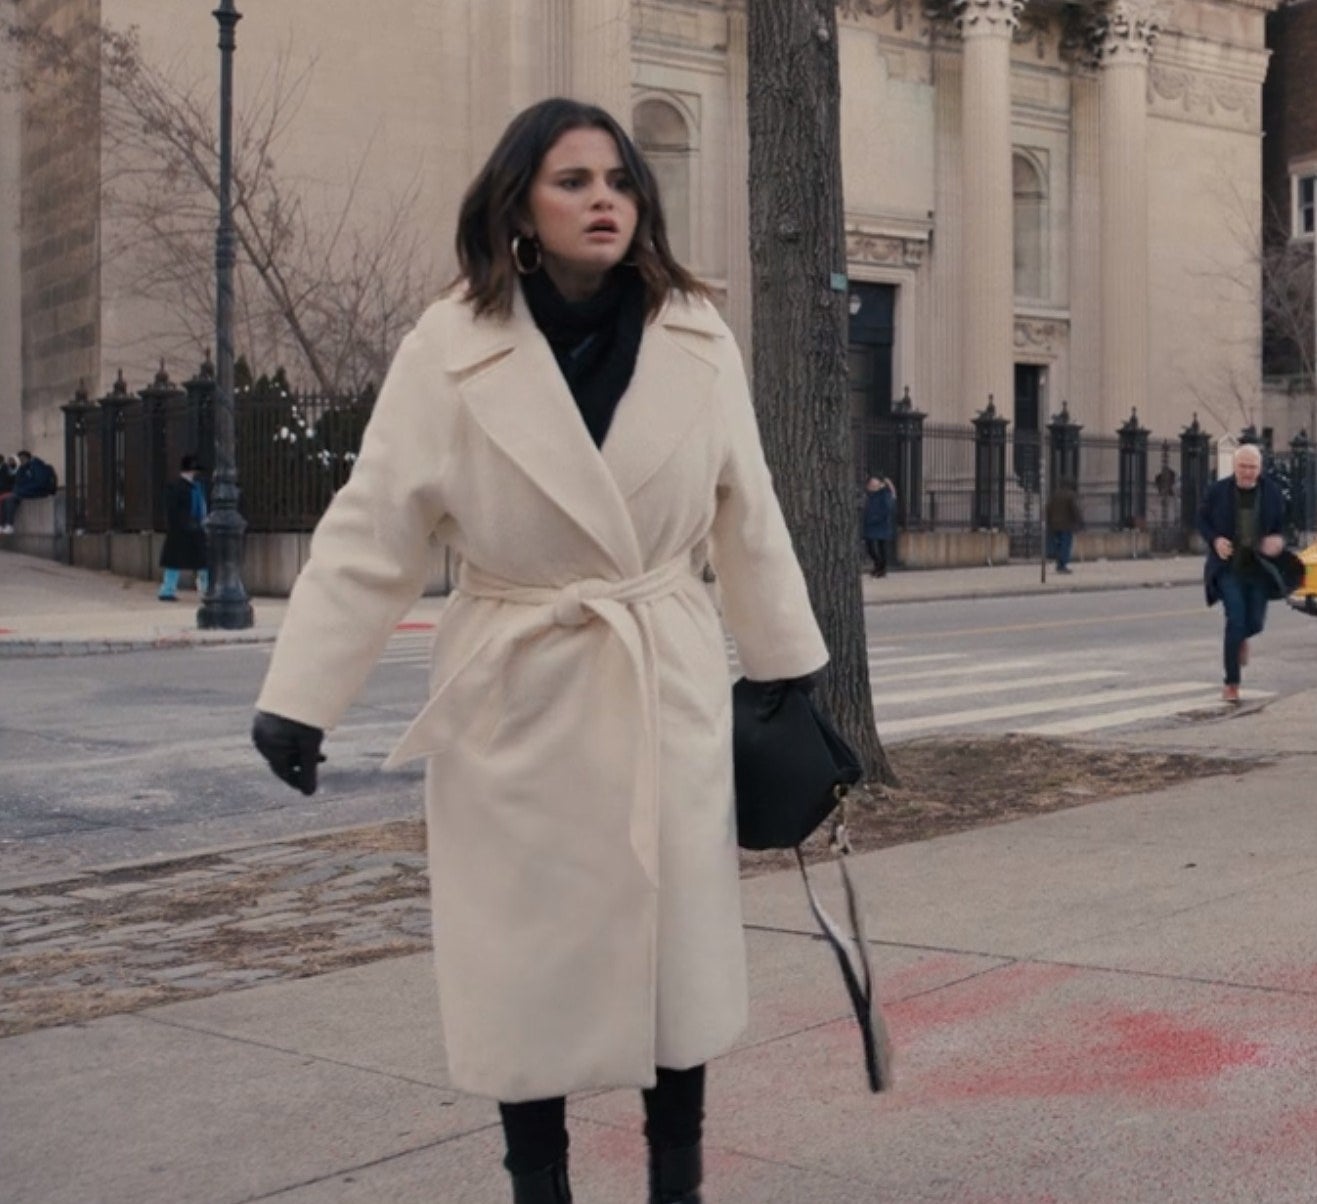 Mabel walking on the street in a white coat